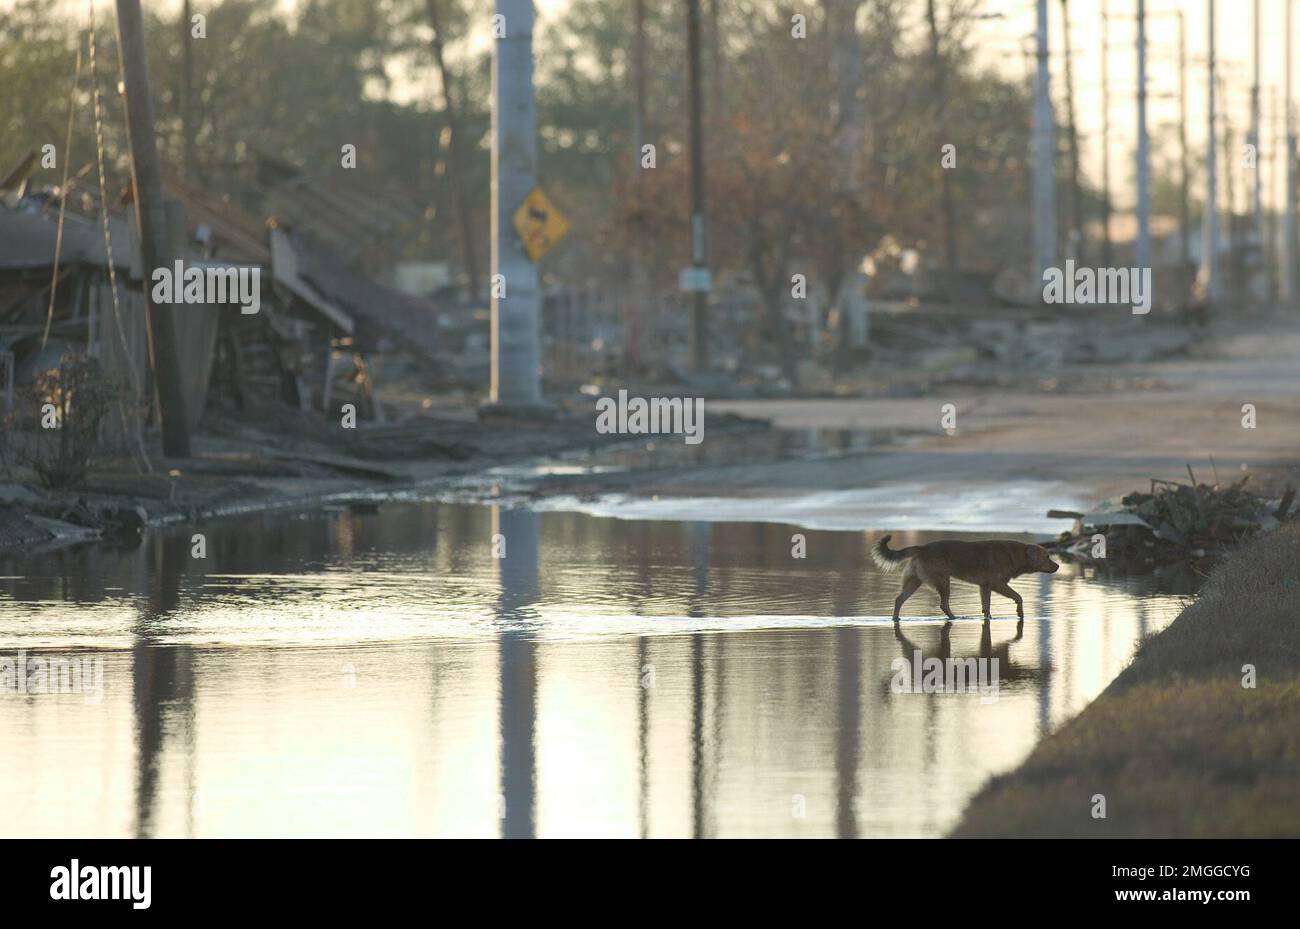 Animals - Rescue - 26-HK-60-2. LA 9th Ward--dog on flooded street with destroyed structures--by Andrea Booher-FEMA. Hurricane Katrina Stock Photo